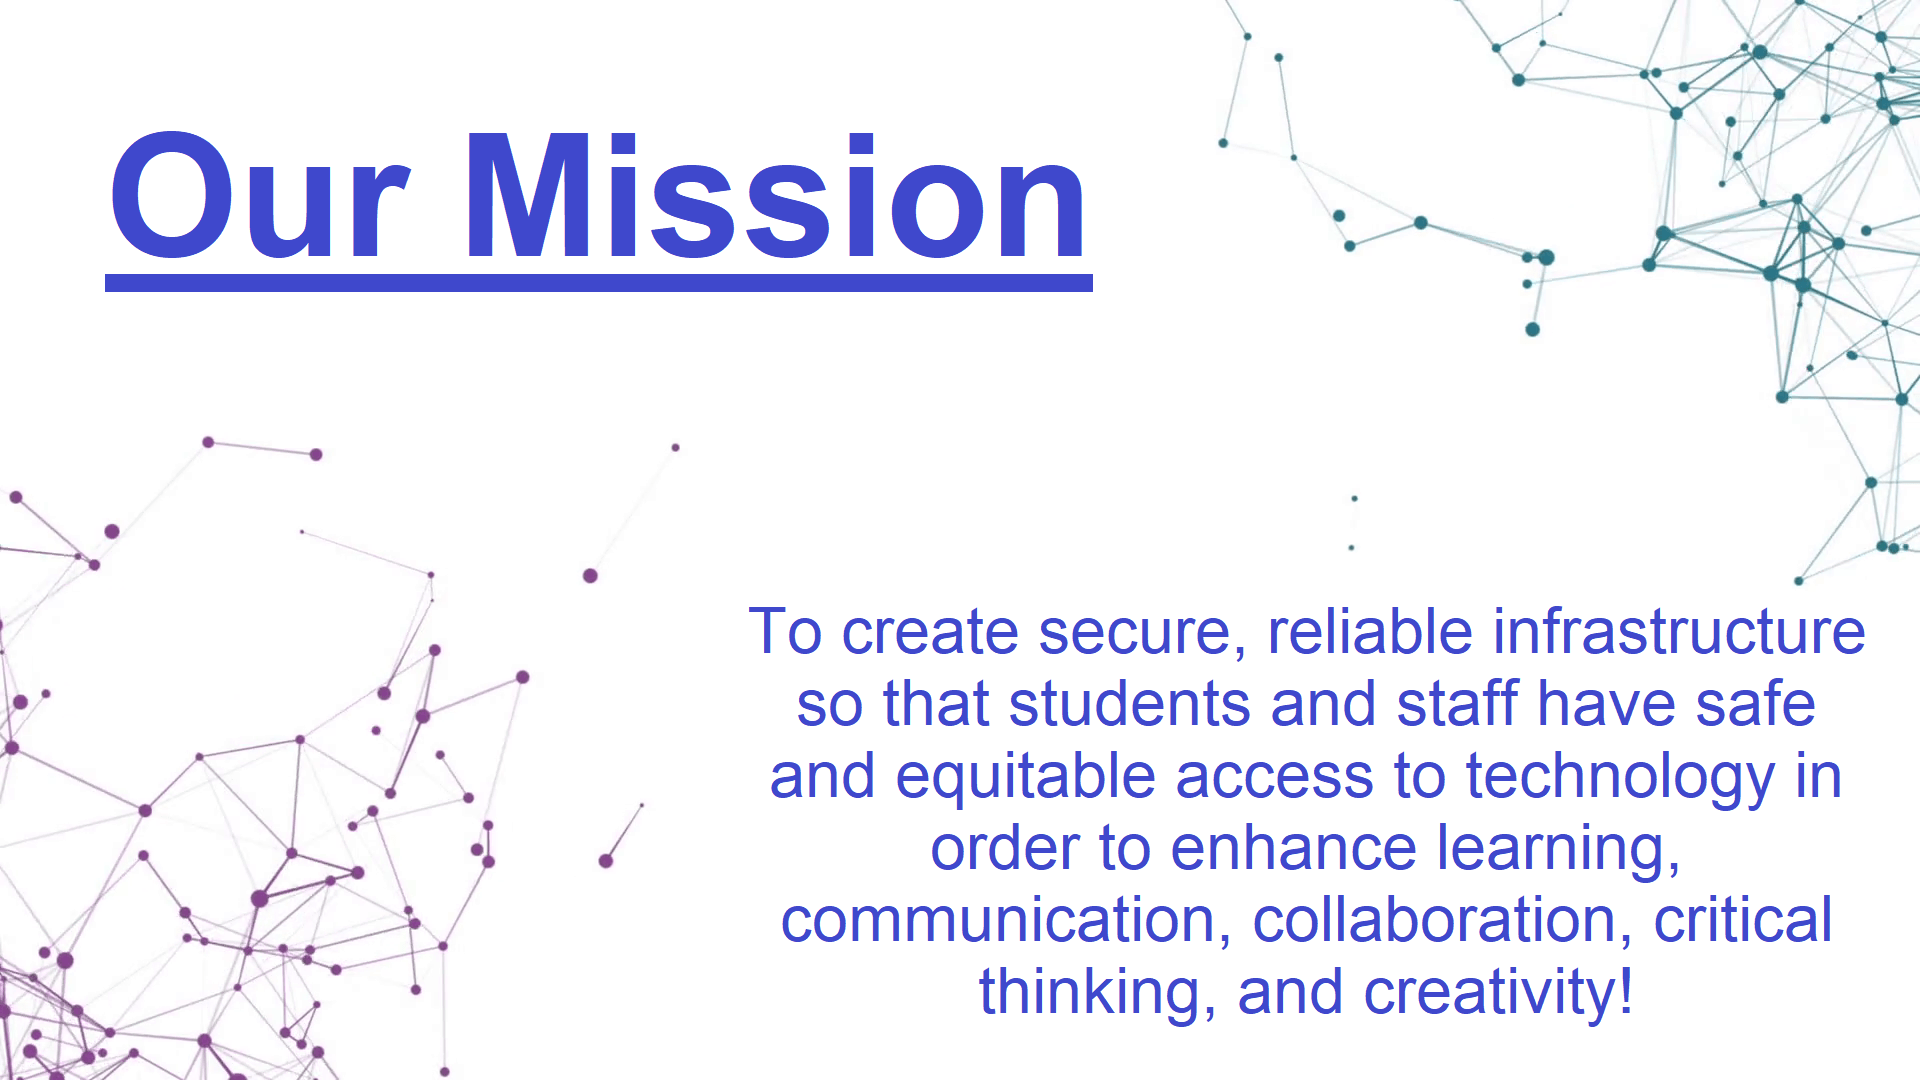 Our Mission To create a secure, reliable infrastructure so that students and staff have safe and equitable access to technology in order to enhance learning, communication, collaboration, critical thinking, and creativity.